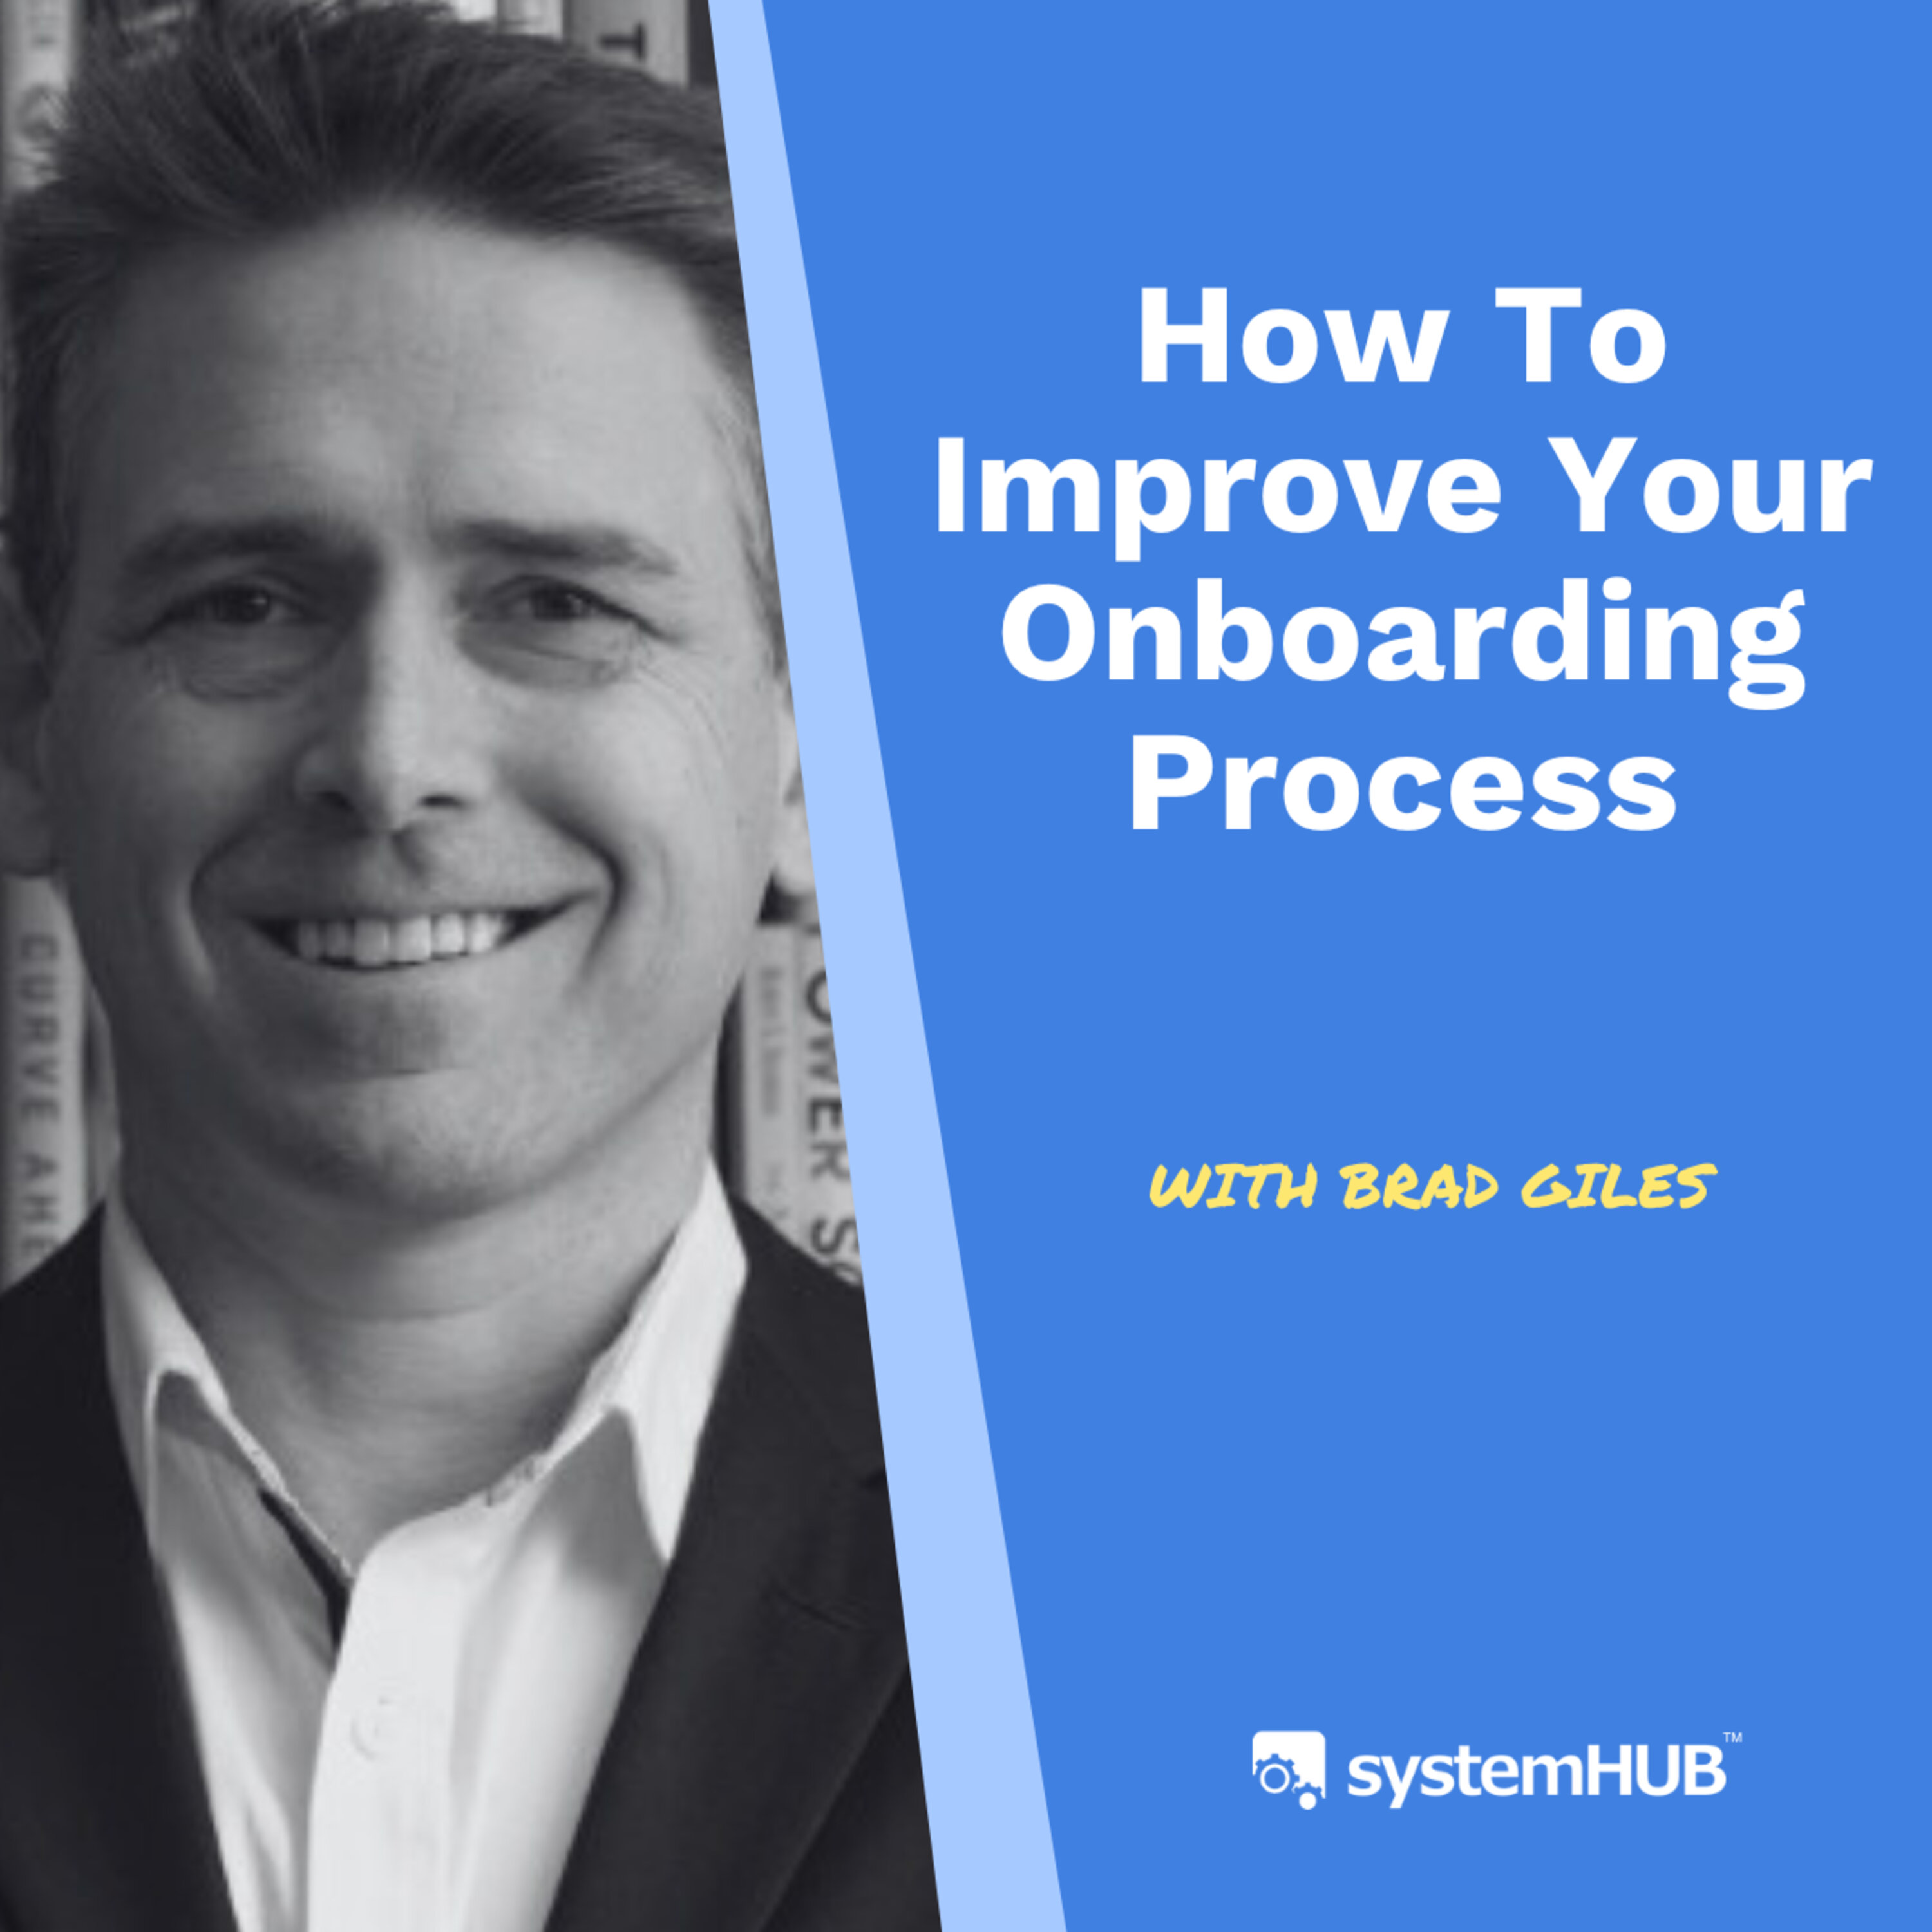 How To Improve Your Onboarding Process with Brad Giles